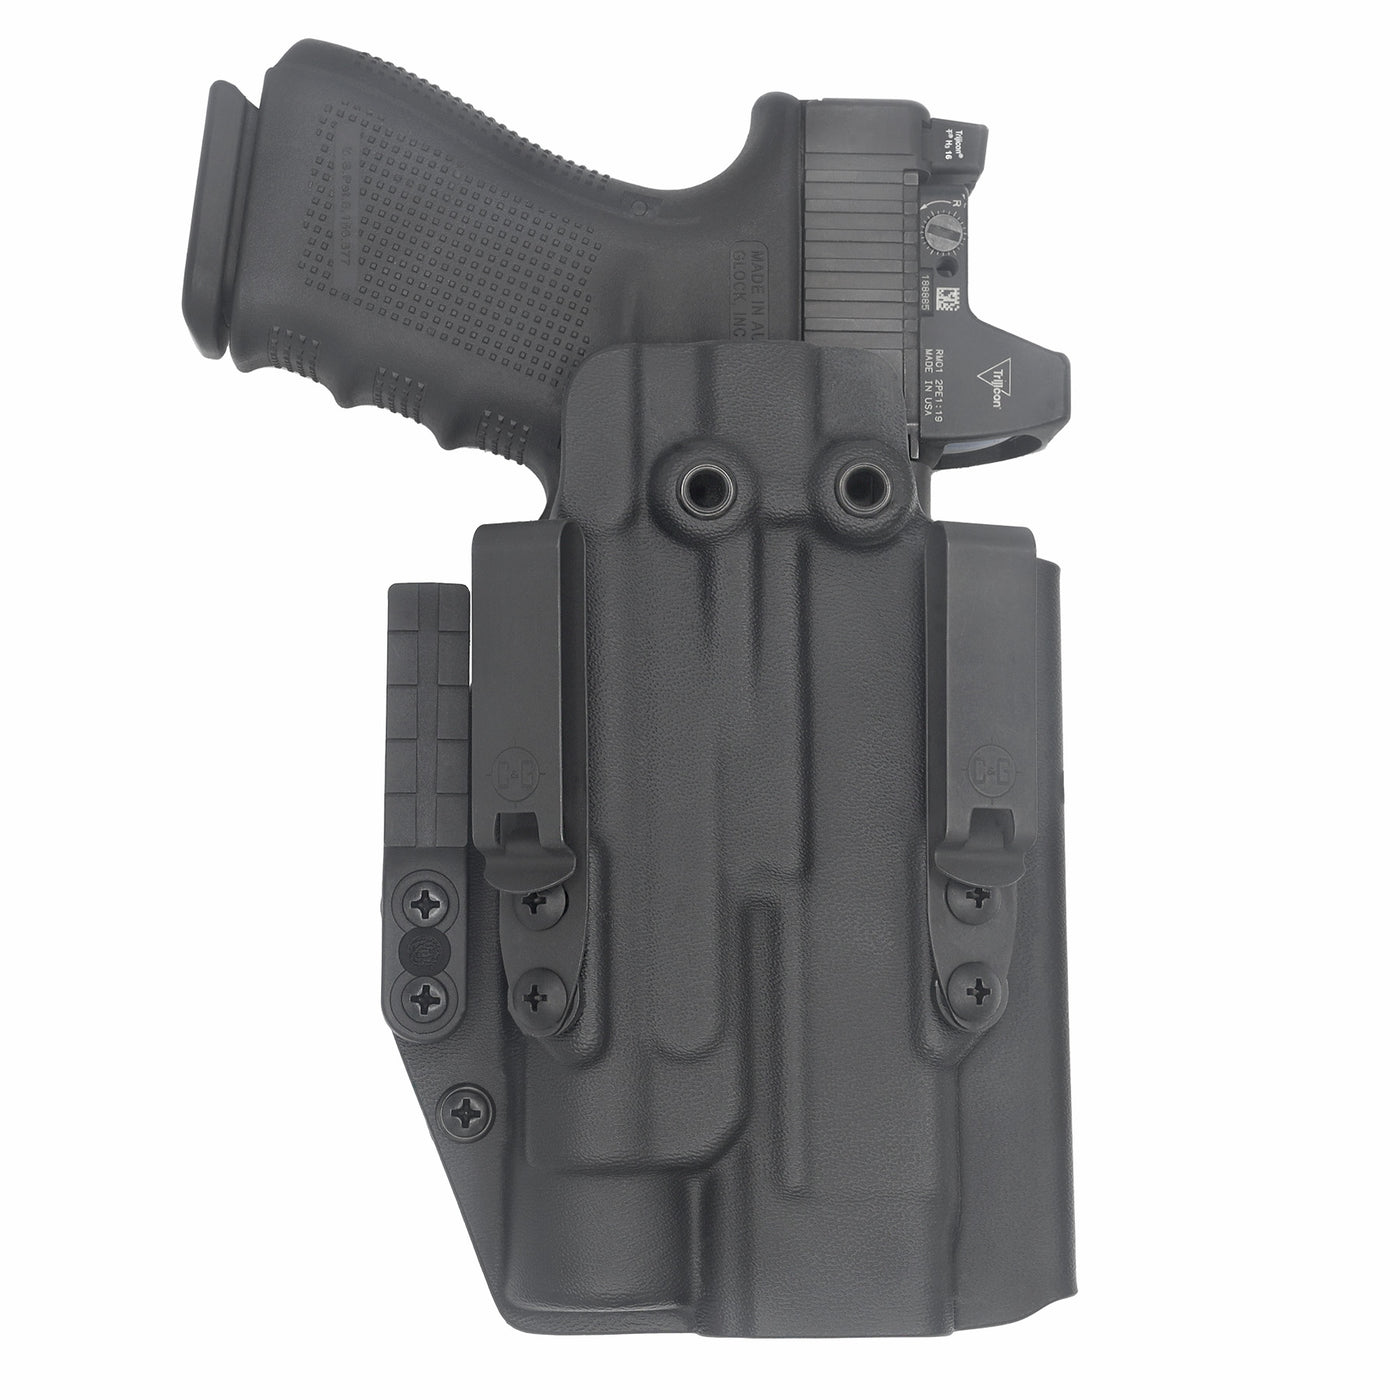 C&G Holsters Quickship IWB Tactical ALPHA UPGRADE Poly80 Streamlight TLR1 in holstered position